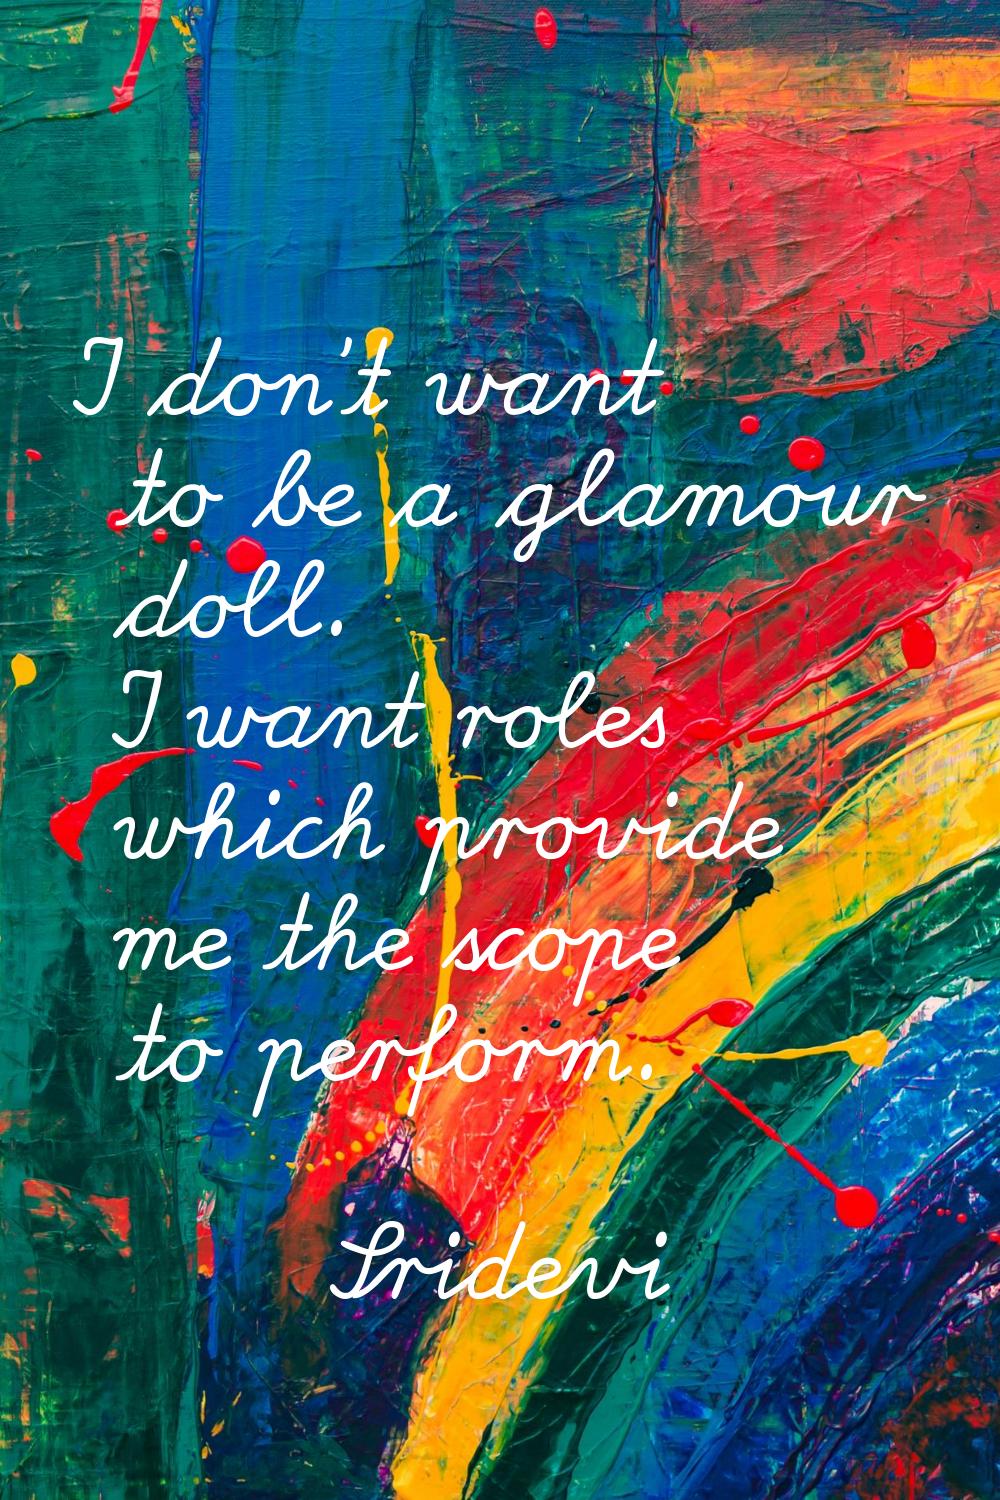 I don't want to be a glamour doll. I want roles which provide me the scope to perform.